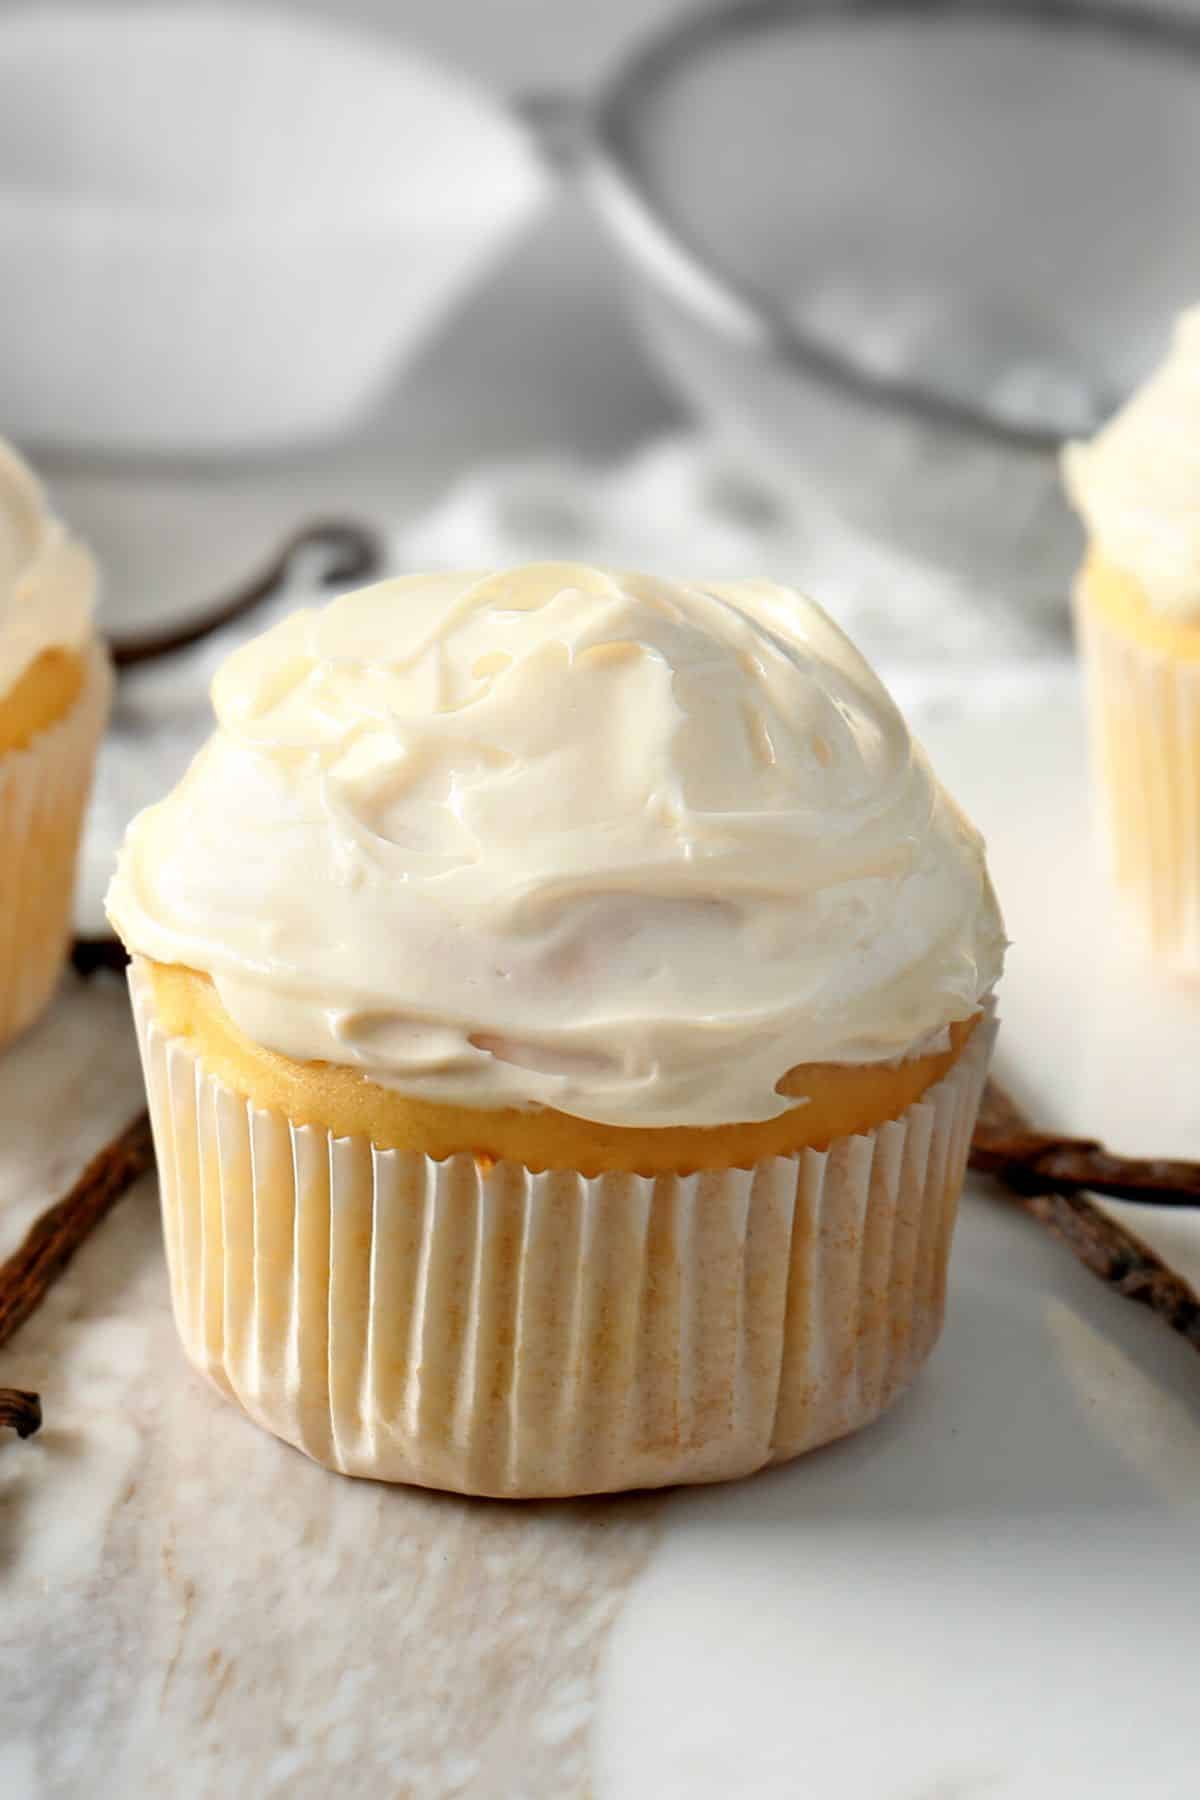 A vanilla cupcake topped with vanilla frosting on a marble counter.